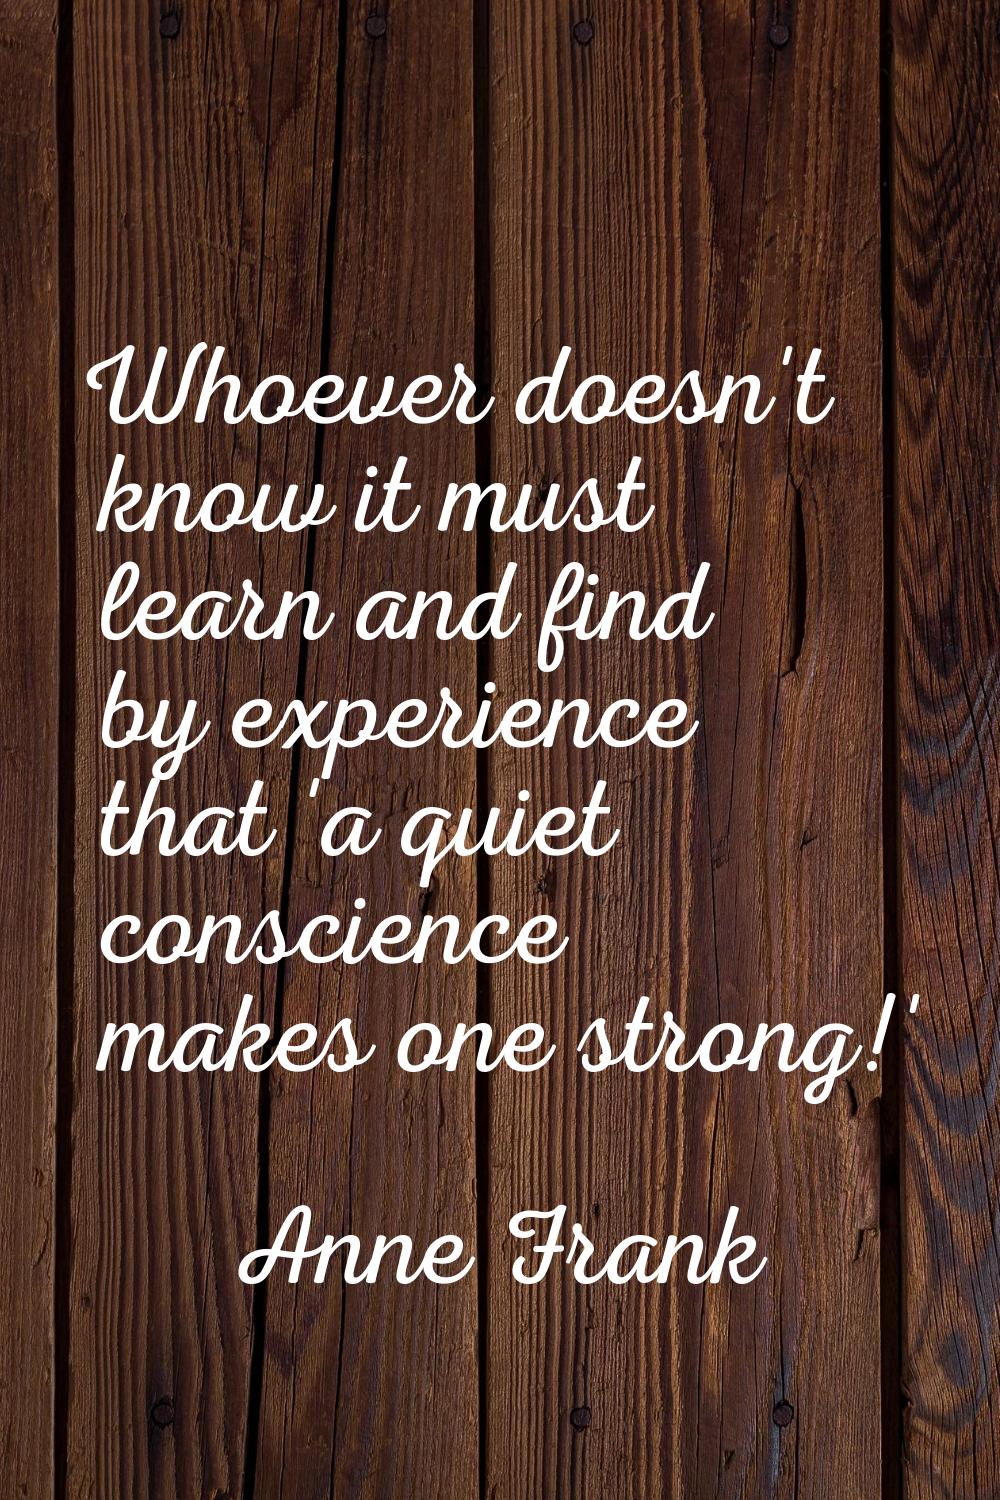 Whoever doesn't know it must learn and find by experience that 'a quiet conscience makes one strong